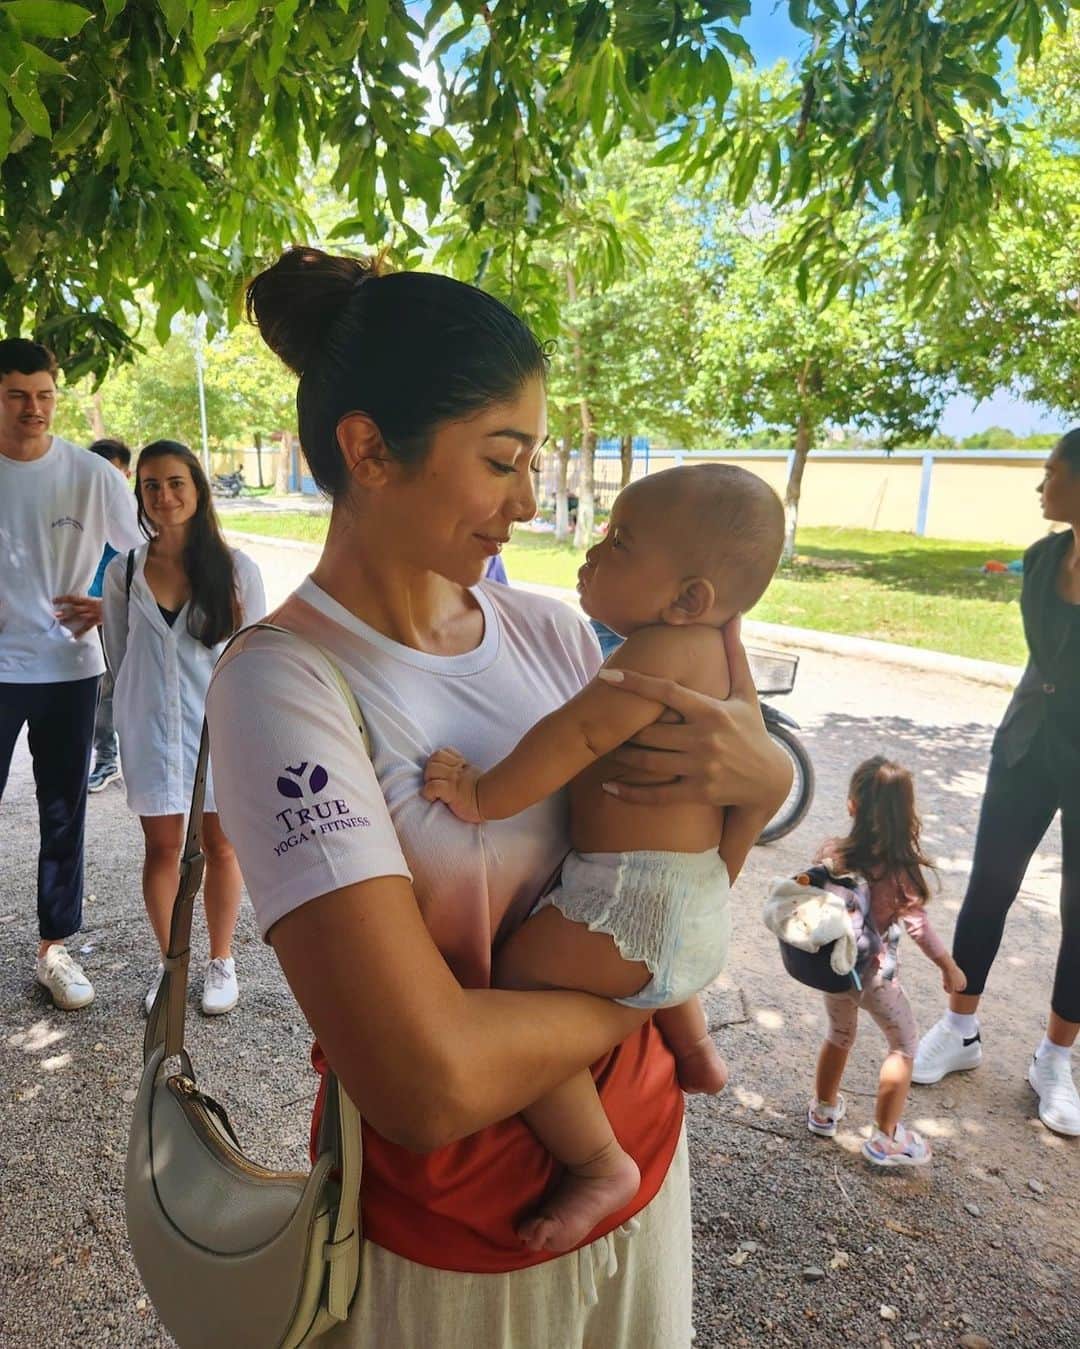 吉川プリアンカさんのインスタグラム写真 - (吉川プリアンカInstagram)「Spreading Smiles in Siem Reap: Highlights from my recent medical mission with @smileasiaorg and @smilecambodiaorg !  As an International brand ambassador for Smile Asia since 2017, attending medical missions holds a special place in my heart. Witnessing the joy on the faces of patients is truly priceless.  Here are some incredible moments from our mission  A diverse team of 40 volunteers from 9 countries came together, including Cambodia, China, Hong Kong, India, Japan, Malaysia, Myanmar, Singapore, and the United States. We were able to cover 23 successful surgeries, 26 health evaluations. We participated in the 7th Edition of 'Walk for a Smile' on 17th June, covering 15km to raise awareness for Smile Cambodia/Asia and children with facial deformities.  I'm thrilled to welcome Saria Oikawa @sariaoikawa Miss Universe Japan 2022 (1st Runner-Up), as Smile Asia's new brand ambassador.  We were honored to have special guests, including Davin Prasat, Miss Universal Woman International 2023 (4th Runner-Up), and Khemma Metayer, Miss Supernational Cambodia 2023.  Join us in spreading more smiles and making a difference!  https://www.smileasia.org/get-involved/medical-volunteer/ (also link in bio) to find out more about our medical volunteering opportunities.  コロナ後はじめて参加したメディカルミッション。今回のミッションでは、23名の患者様の手術を行い、26名の患者様の診察をいたしました。  スクリーニング日に今手術ができる状態でないと診断した患者様へは、手術ができるお身体になるまでサポートを行っています。  また、本ミッションでは、計9カ国より40名のボランティアの方々が参加してくださいました。  スマイル・アジアでは、ドクター、ナース、現場に入っていただけるボランティアの方々を世界中より常に募集しております。ご興味のある方は、プロフィールのリンクよりご連絡ください。  最後に、私事ではありますが、これまではブランドアンバサダーとして活動してきましたが、本年度よりスマイル・ジャパンの理事としても関わらせていただくことになりました。  今後ともスマイル・アジアをはじめジャパン、そして各国の支部をご支援いただけますと幸いです。  世界中に笑顔が増えることを心より願って。  #smileasia #smilecambodia #facialdeformaties #cleflipandpalate #medicalmission #cambodia #smile #internationalbrandambassador #helpusspreadsmiles #スマイルアジア #スマイルカンボジア #医療 #口唇口蓋裂 #手術 #医療現場 #アンバサダー #笑顔」6月20日 21時00分 - priyankayoshikawa